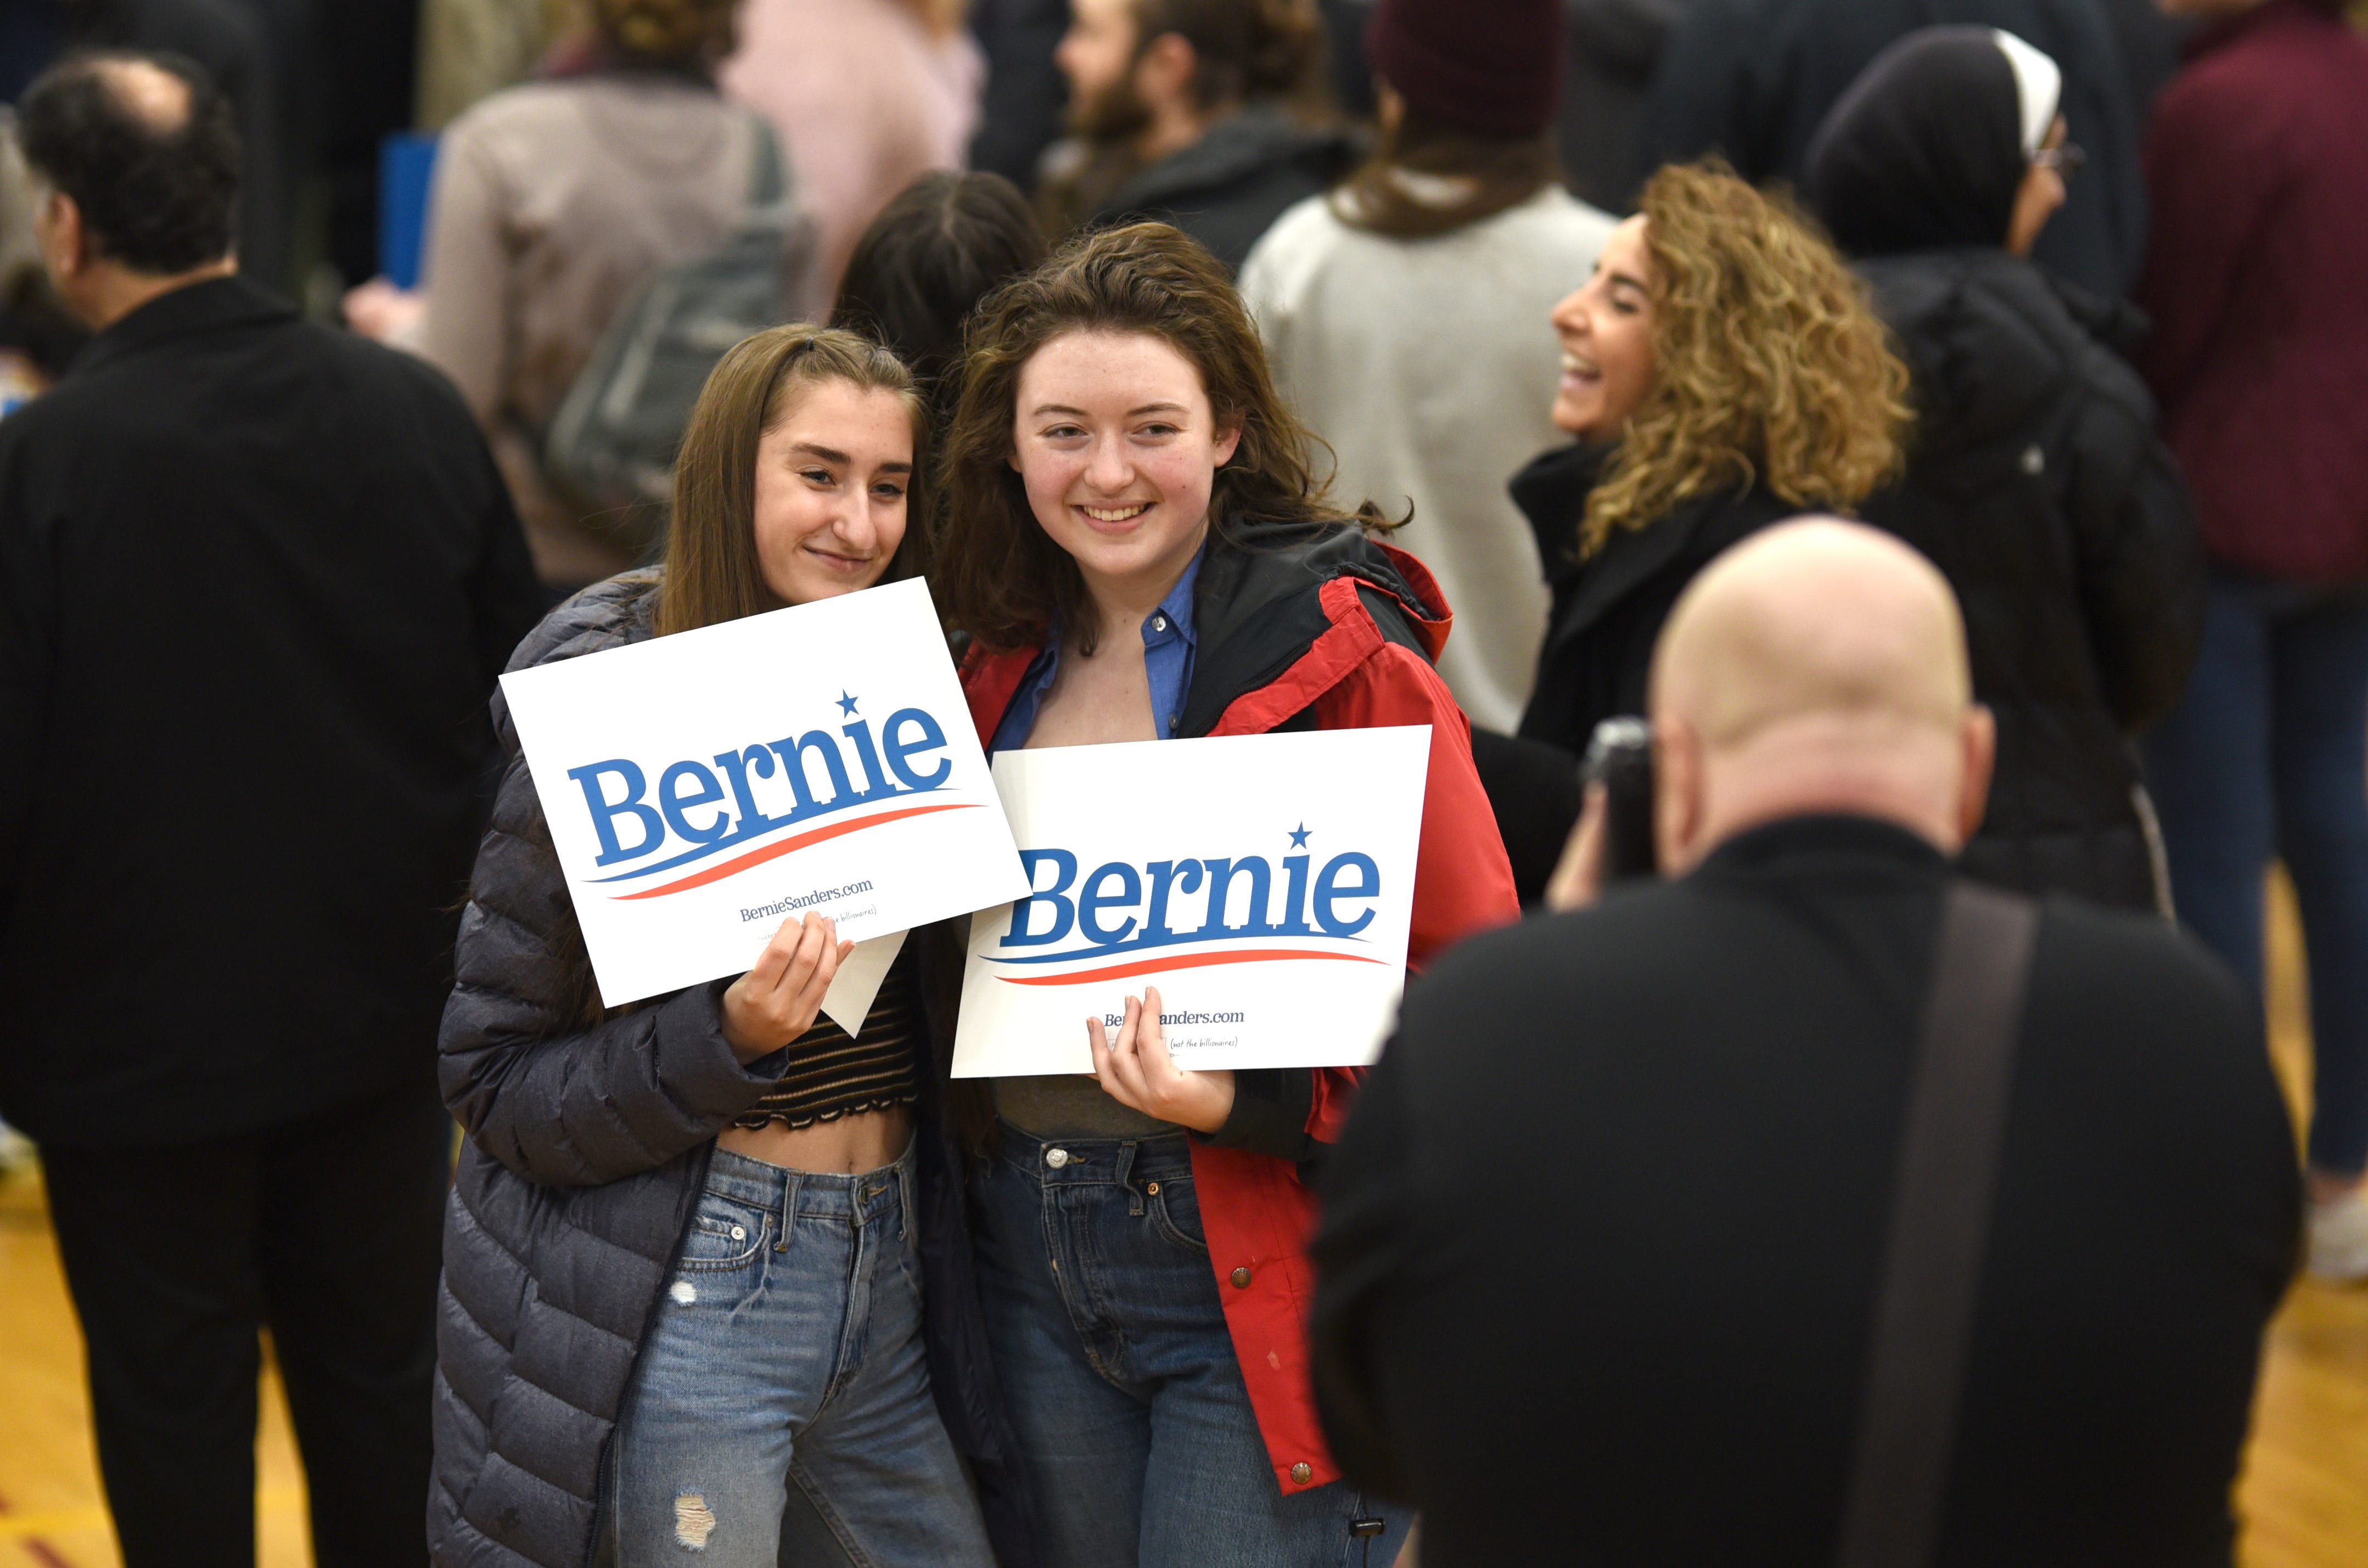 High School student show their support for Bernie Sanders .